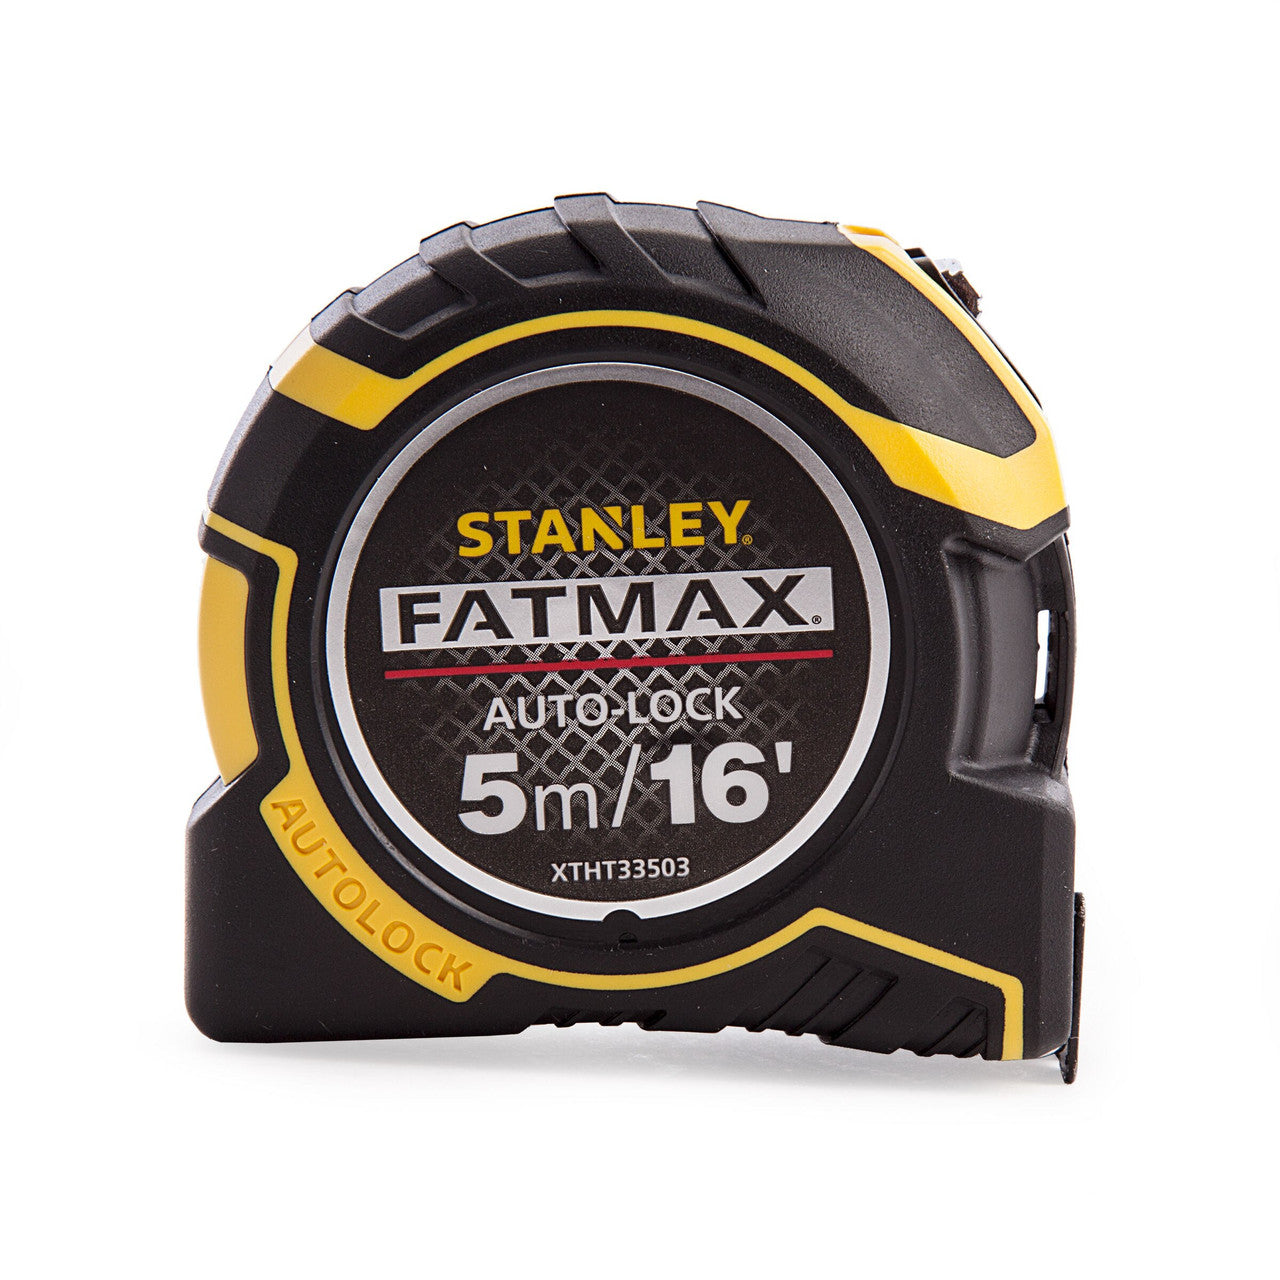 Stanley XTHT0-33503 FatMax Autolock Tape Measure with Blade Armor 5m